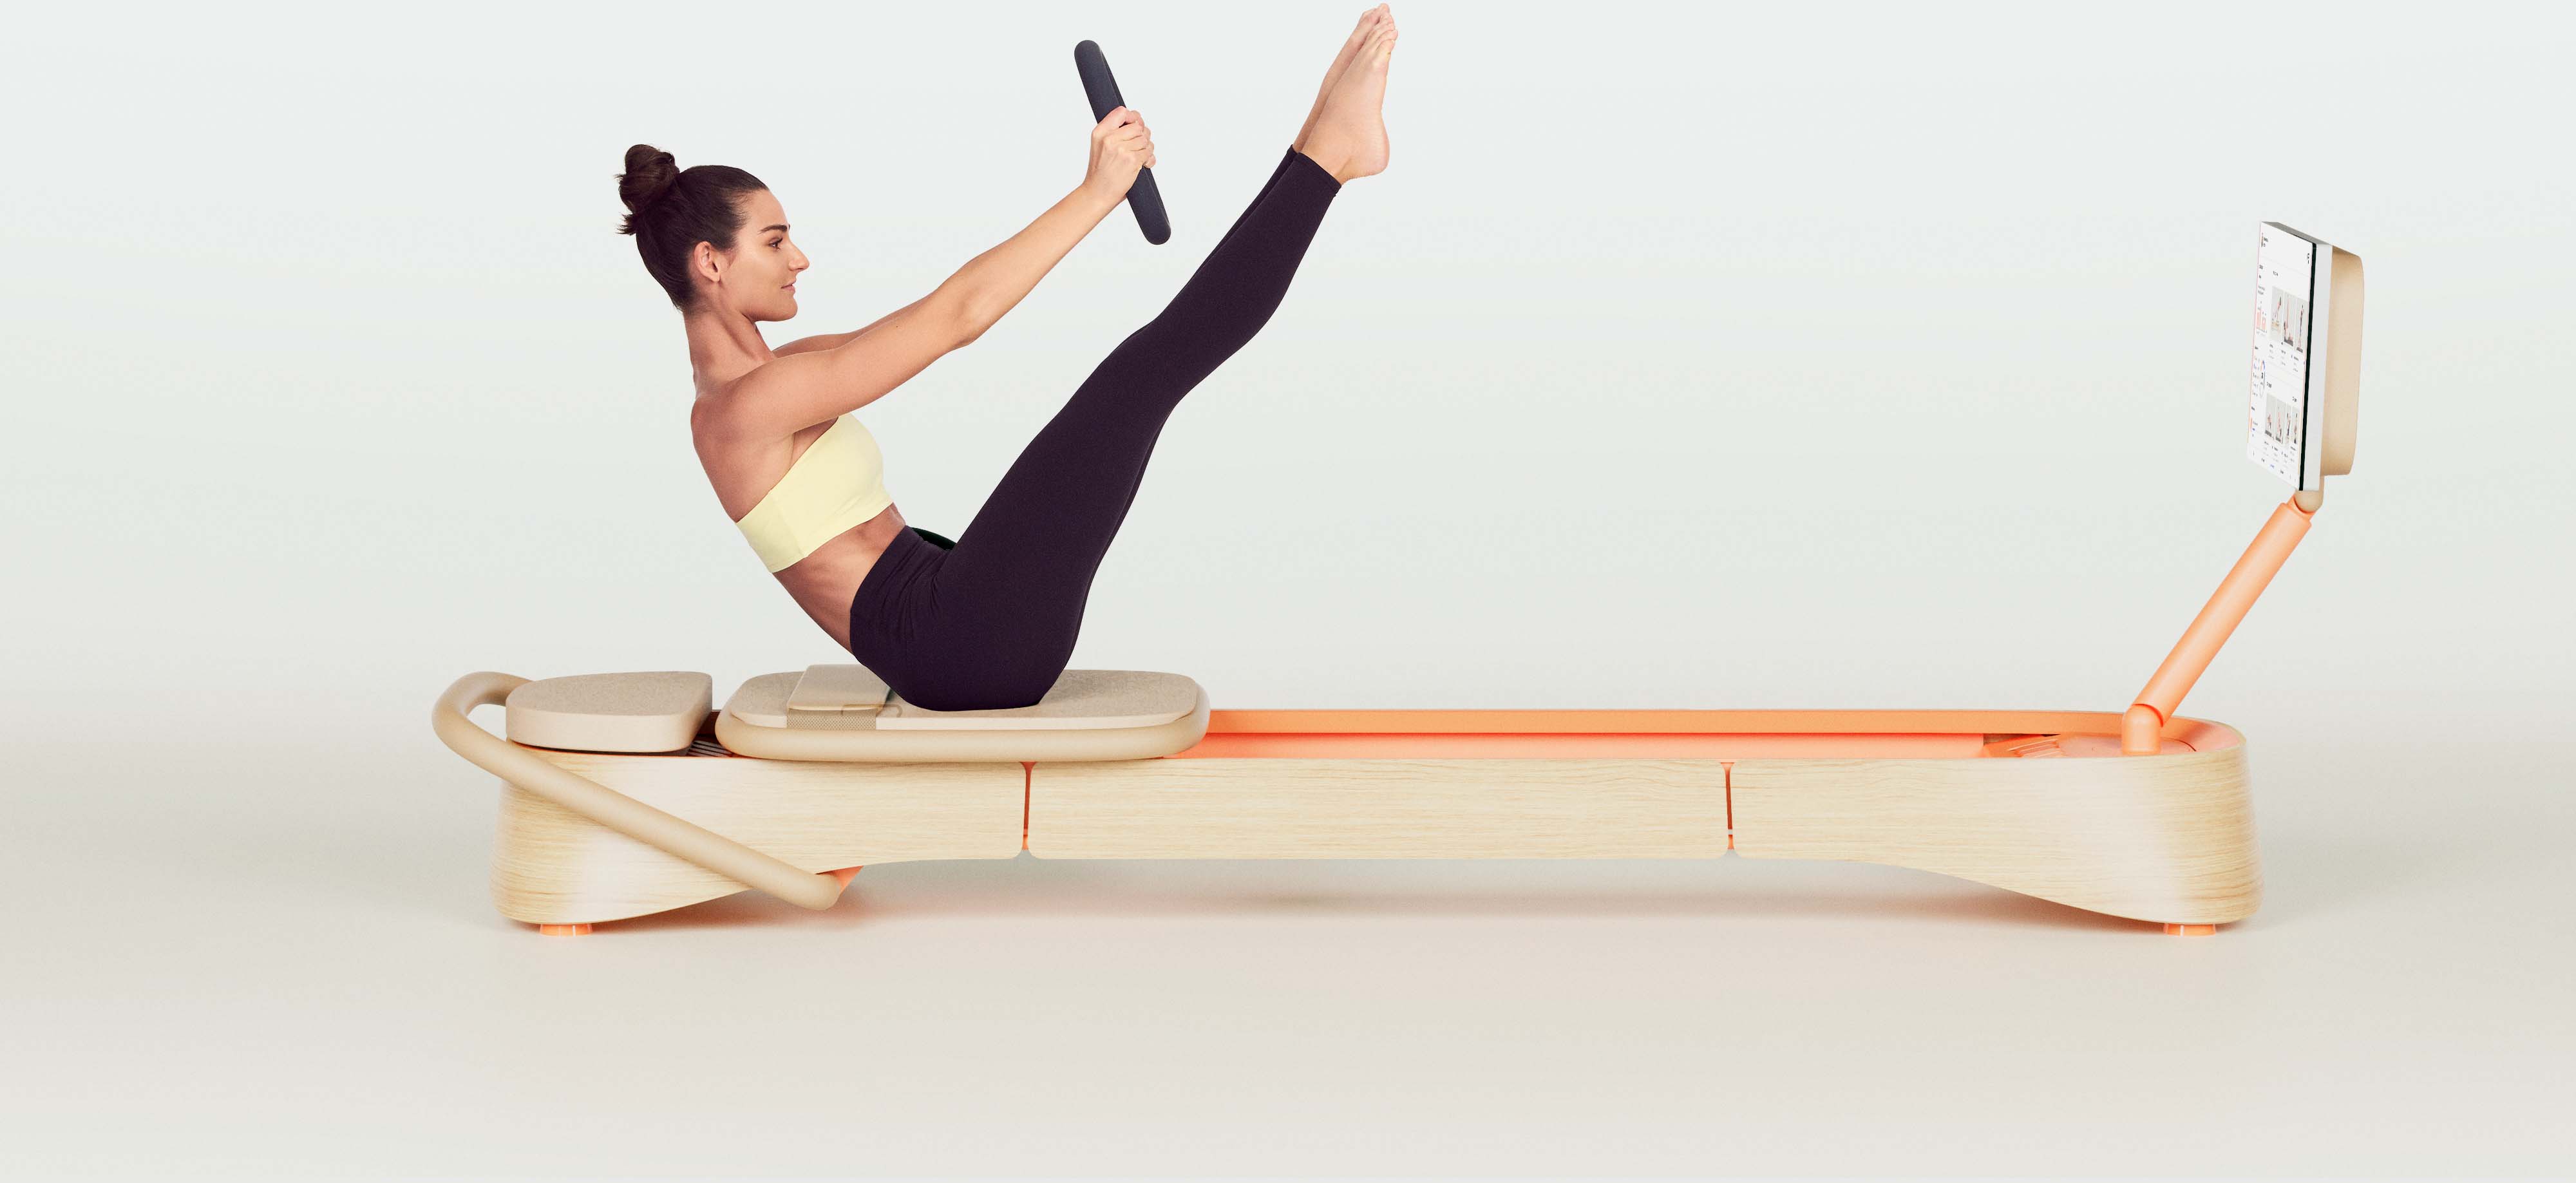 3 Ways a Pilates Reformer Strengthens Your Mental Game